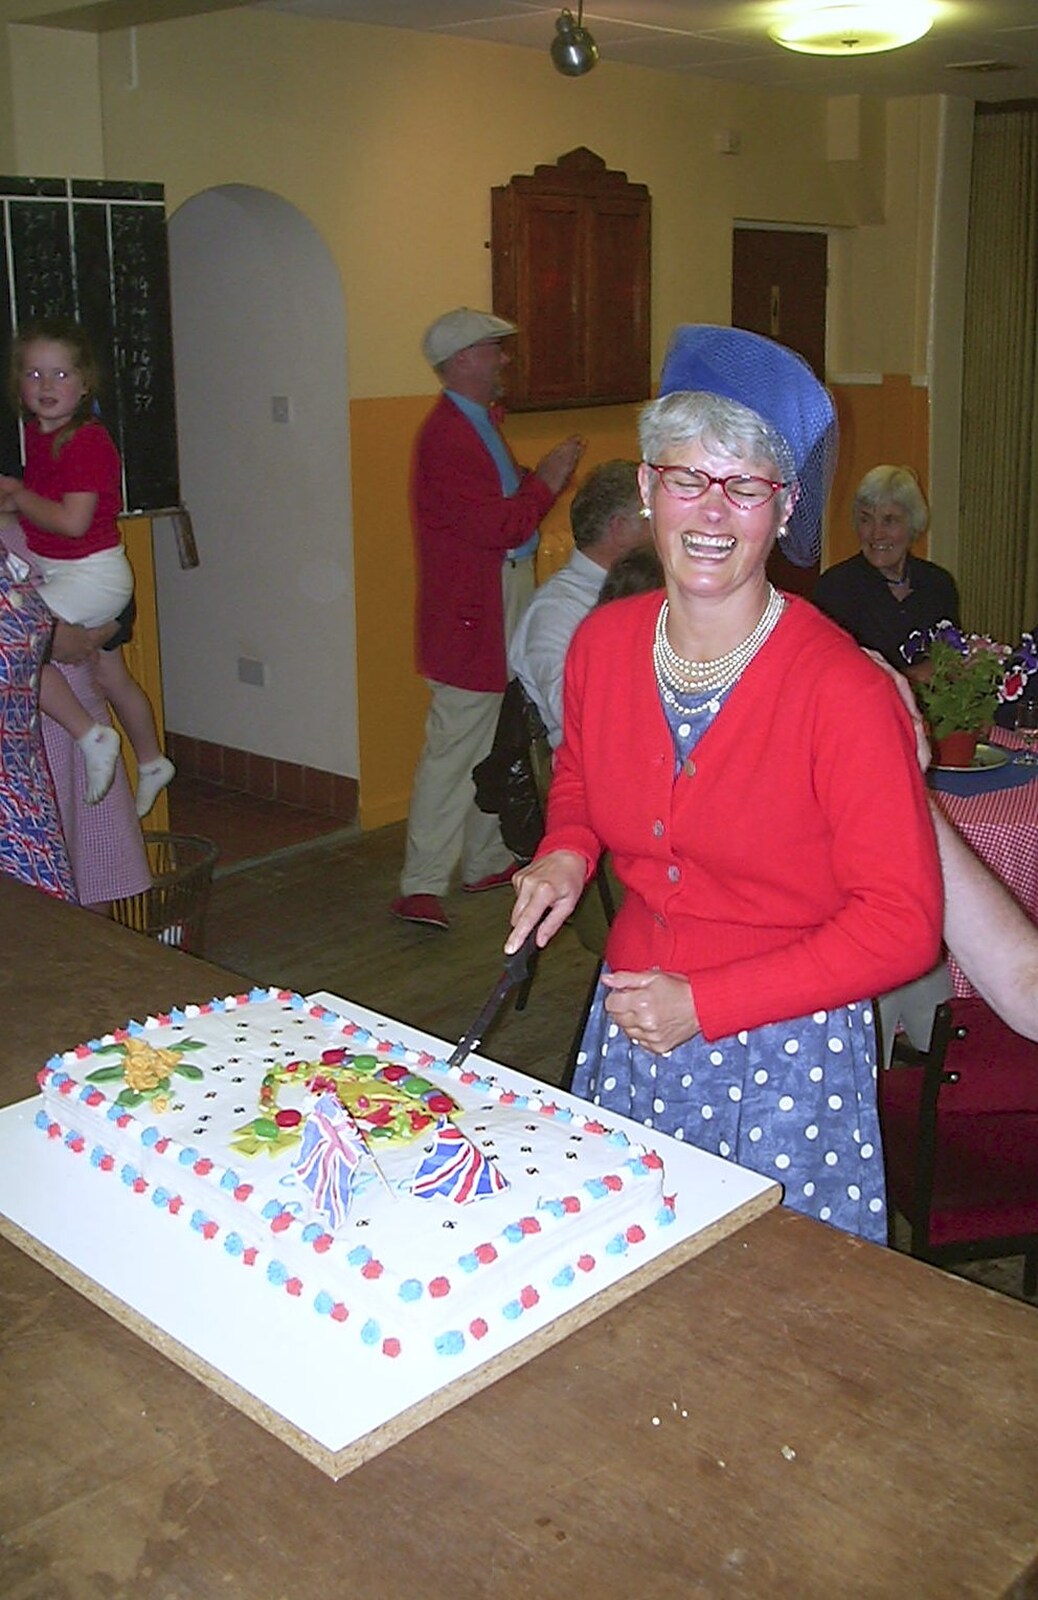 It's time for cake cutting from Golden Jubilee Celebrations, The Village Hall, Brome, Suffolk - 4th June 2002